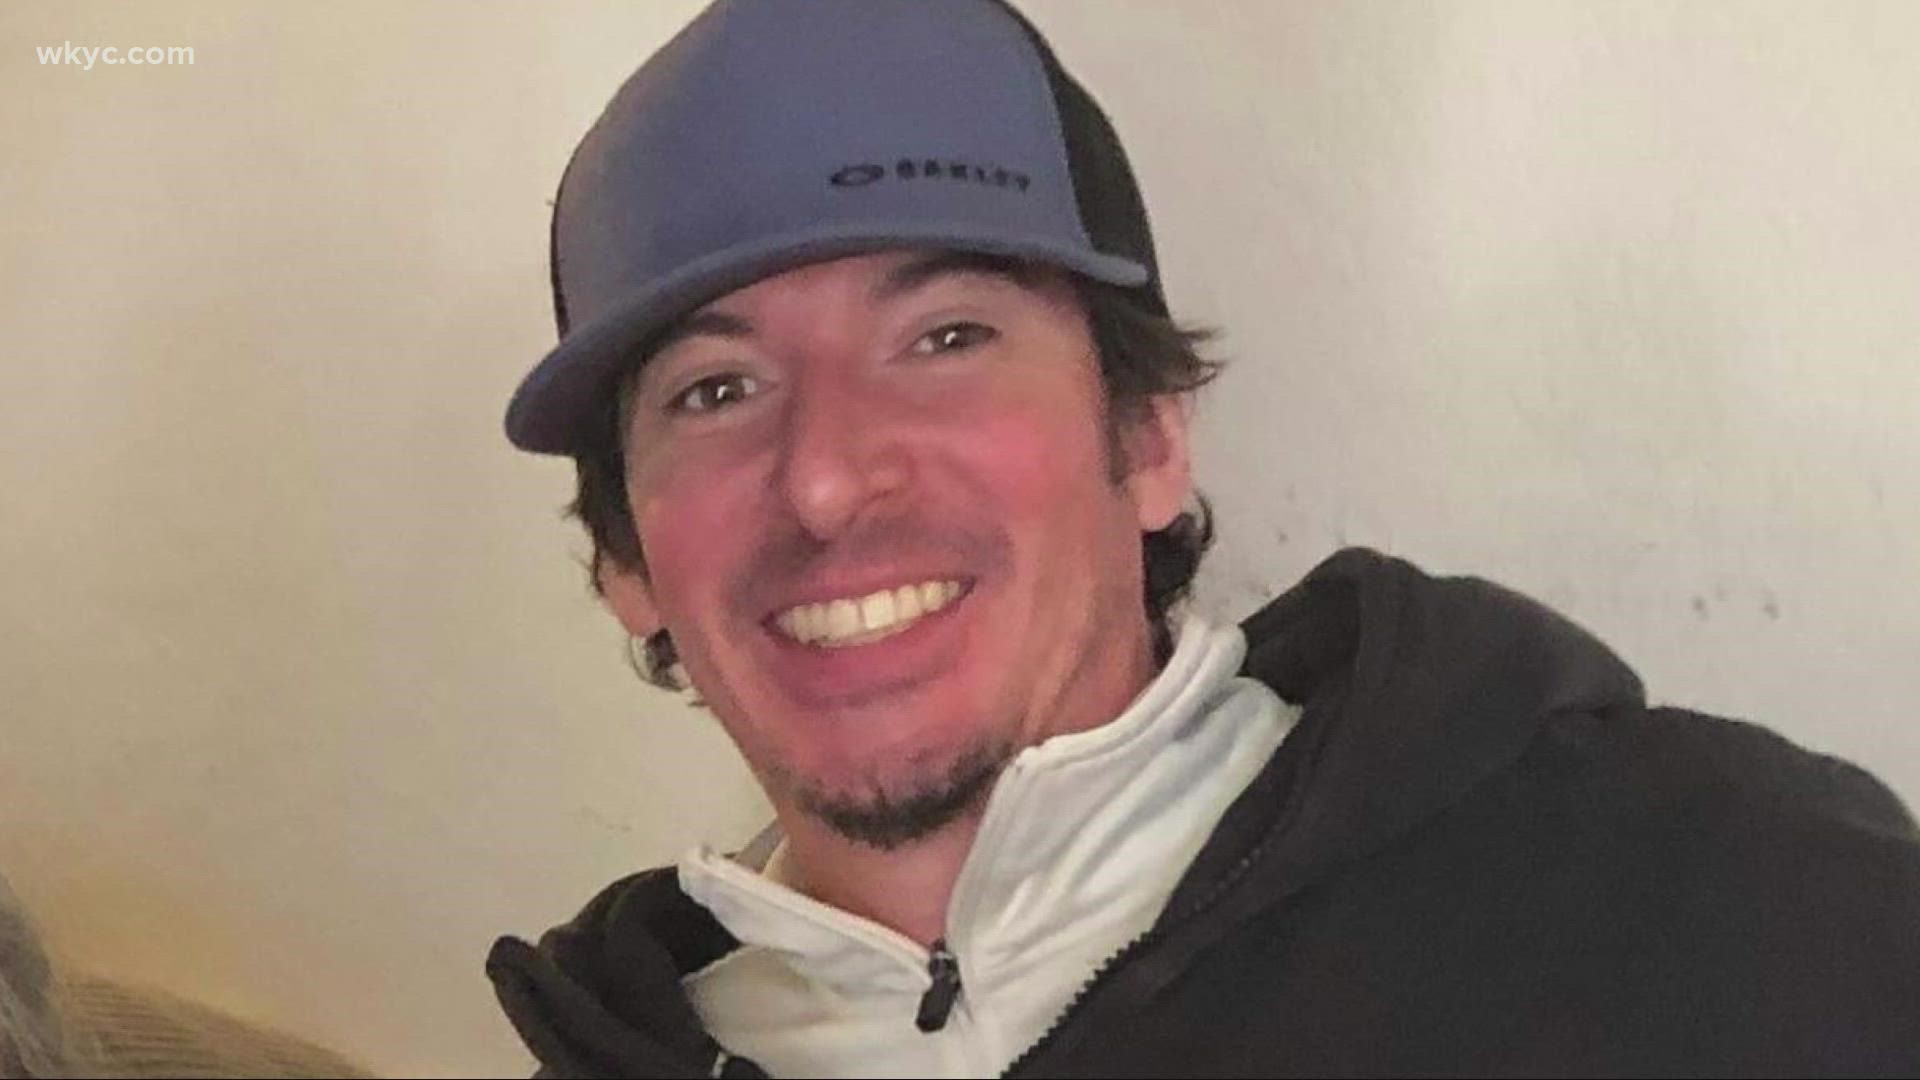 The winter storm pounding northern California right now,  is hampering the search for a missing skier who grew up in northeast Ohio. Mark Naymik has the latest.